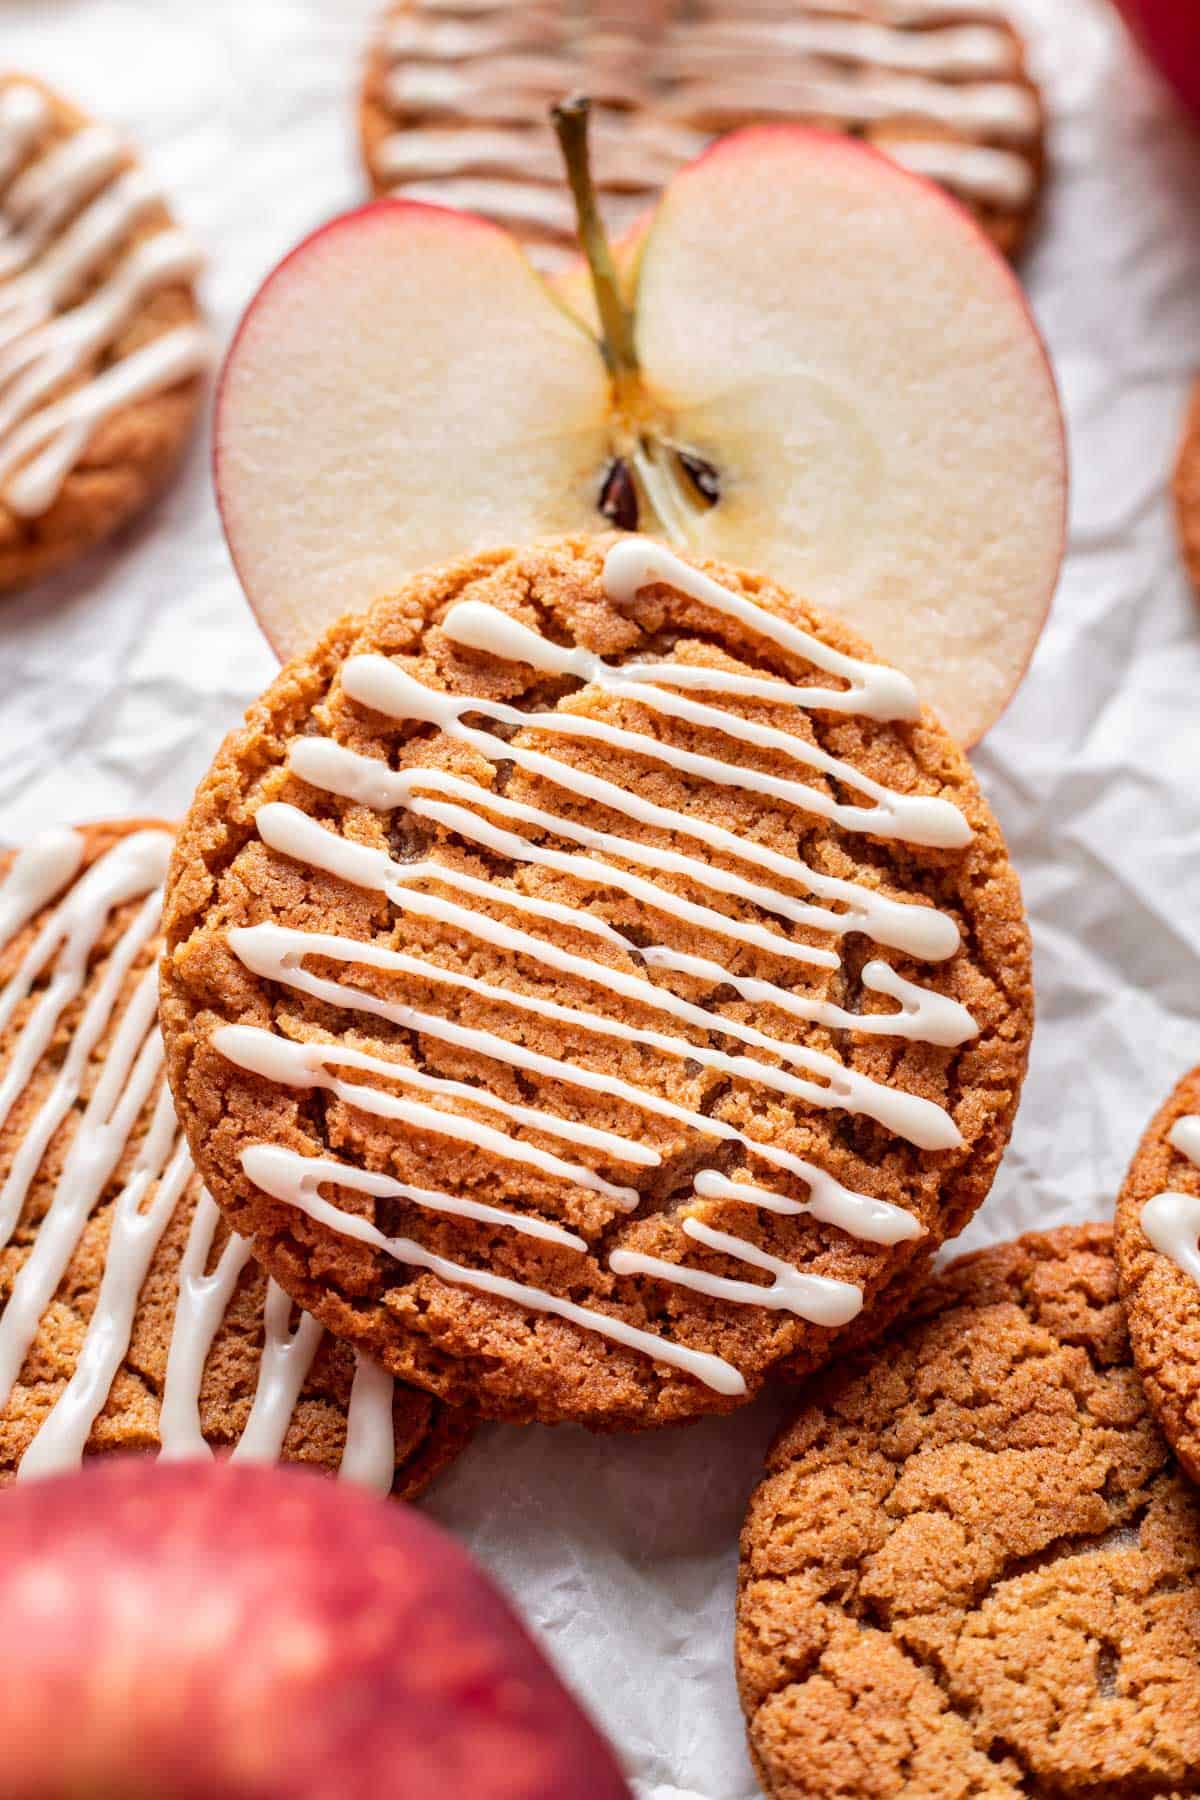 Chewy apple cider cookies resting on sliced apples.